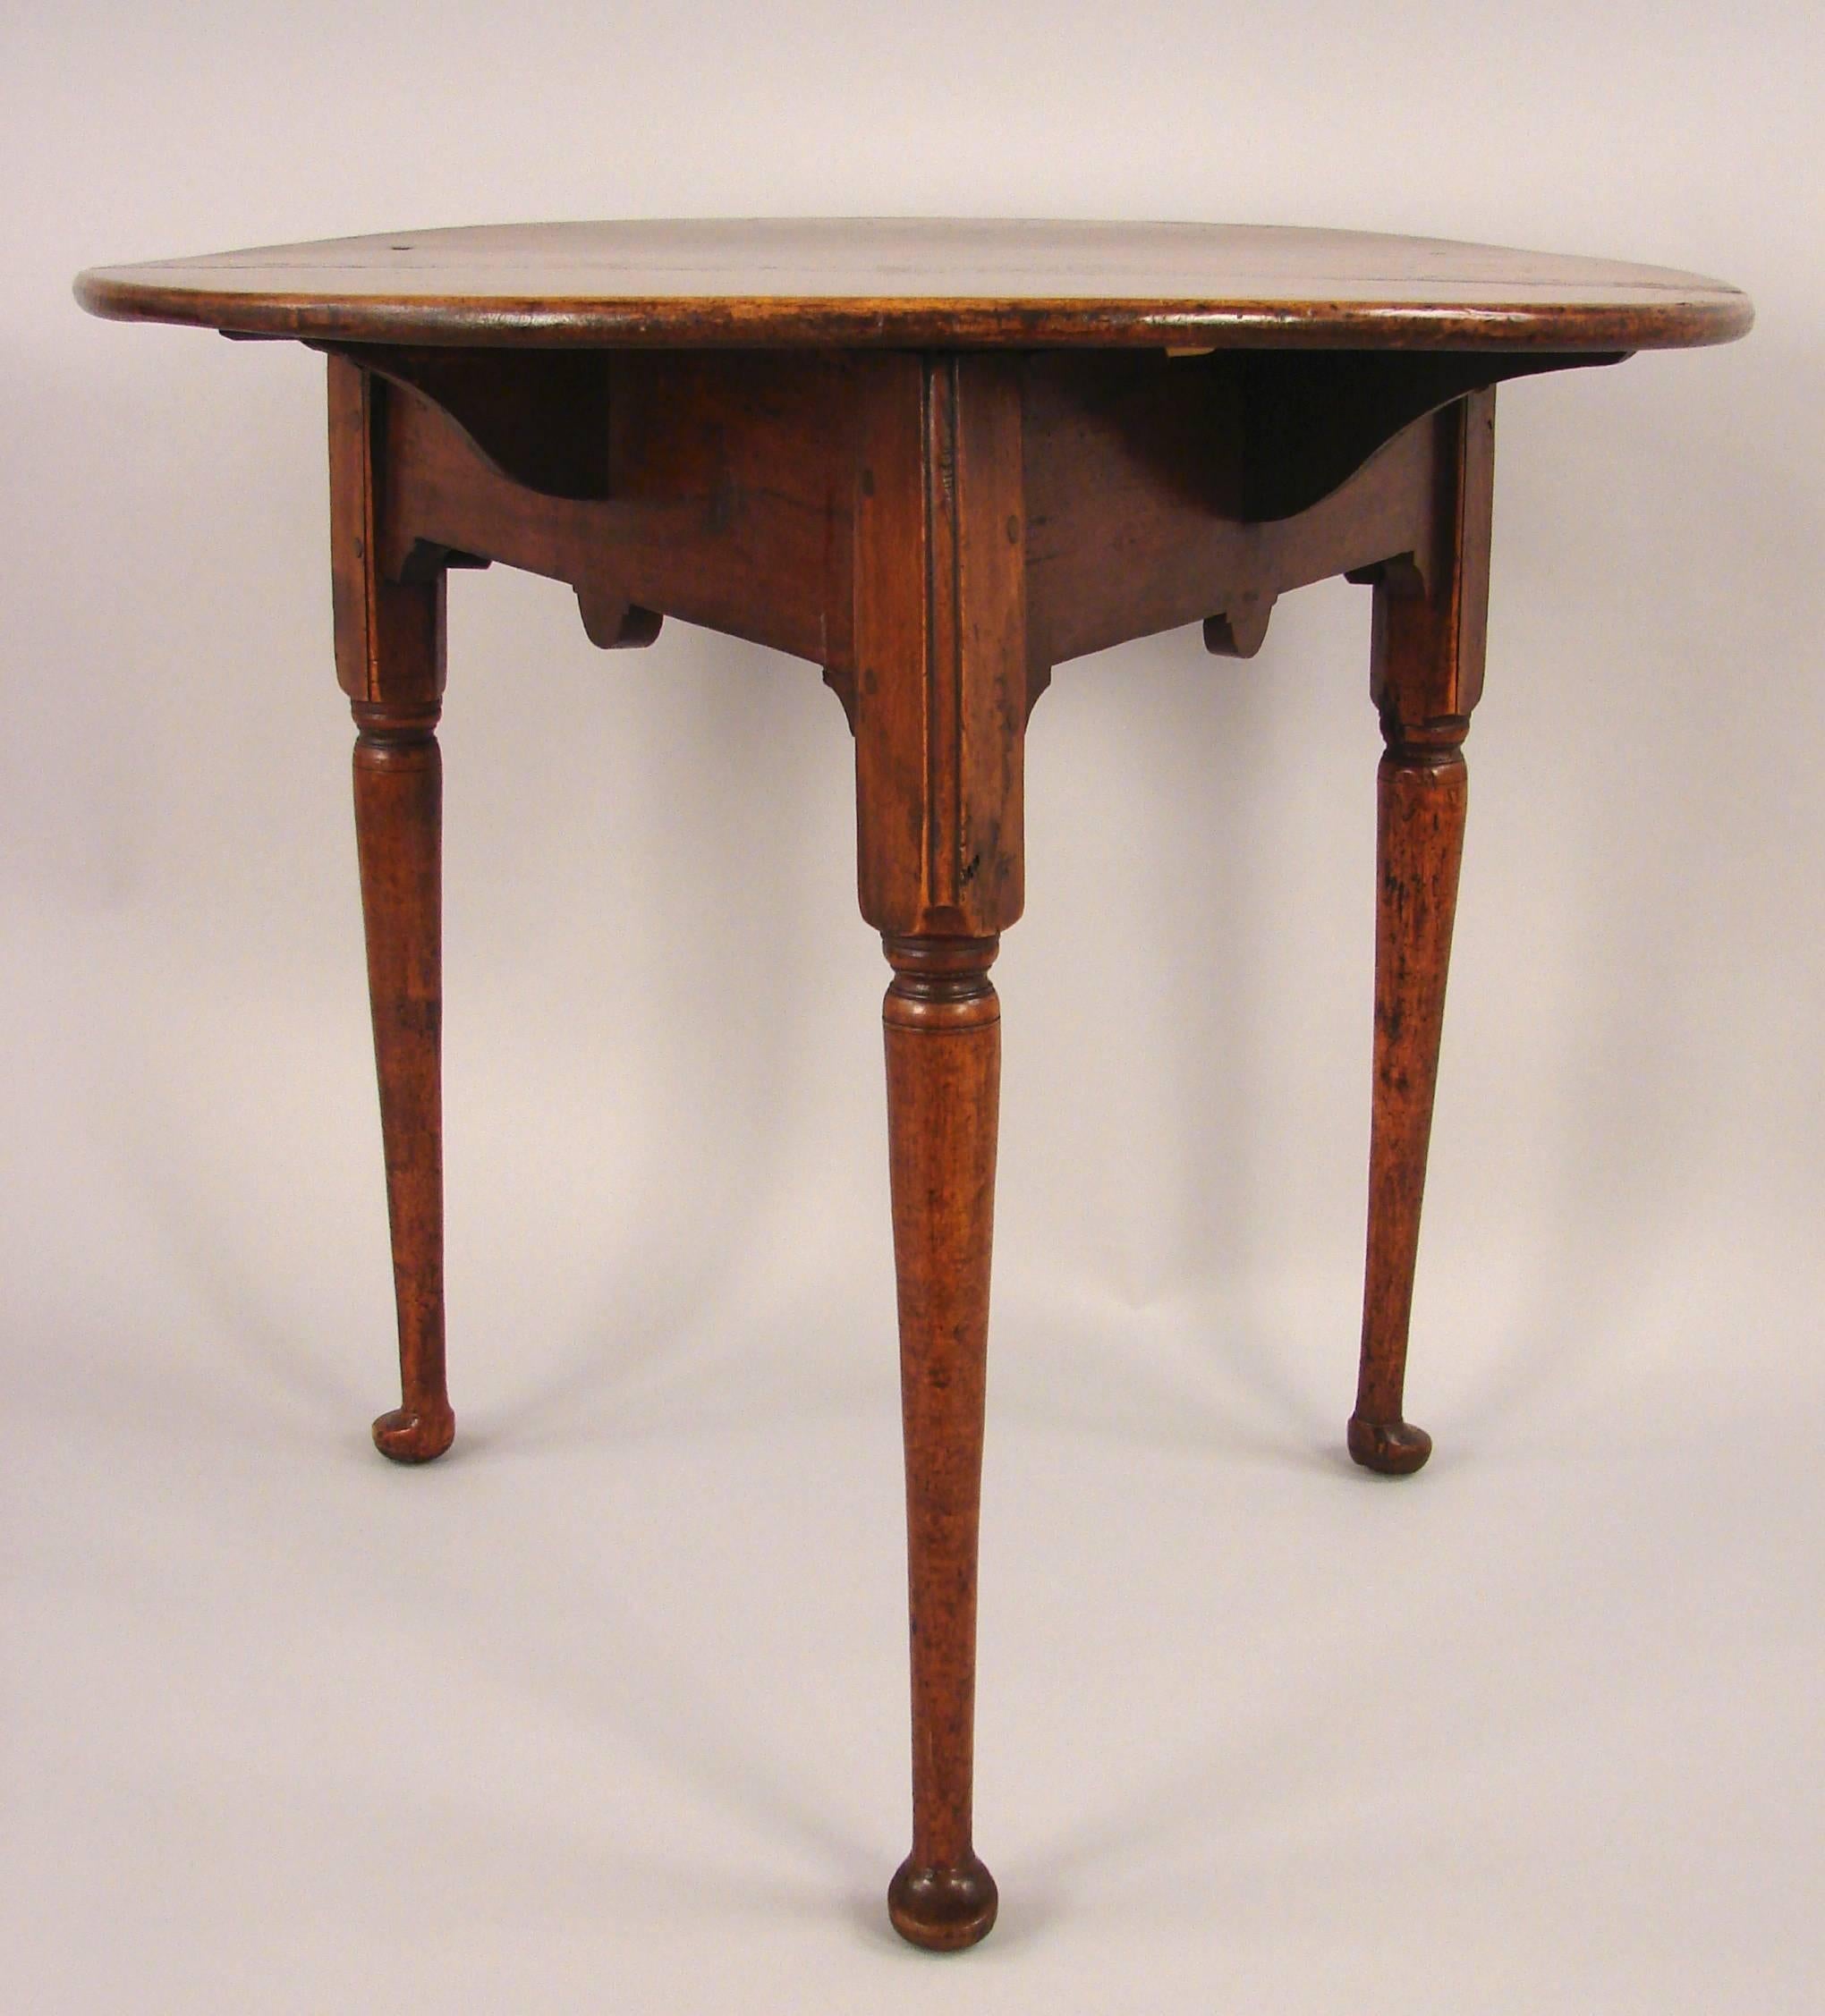 A George II walnut tavern table, the overhanging circular top supported on turned legs ending in pad feet, circa 1760.